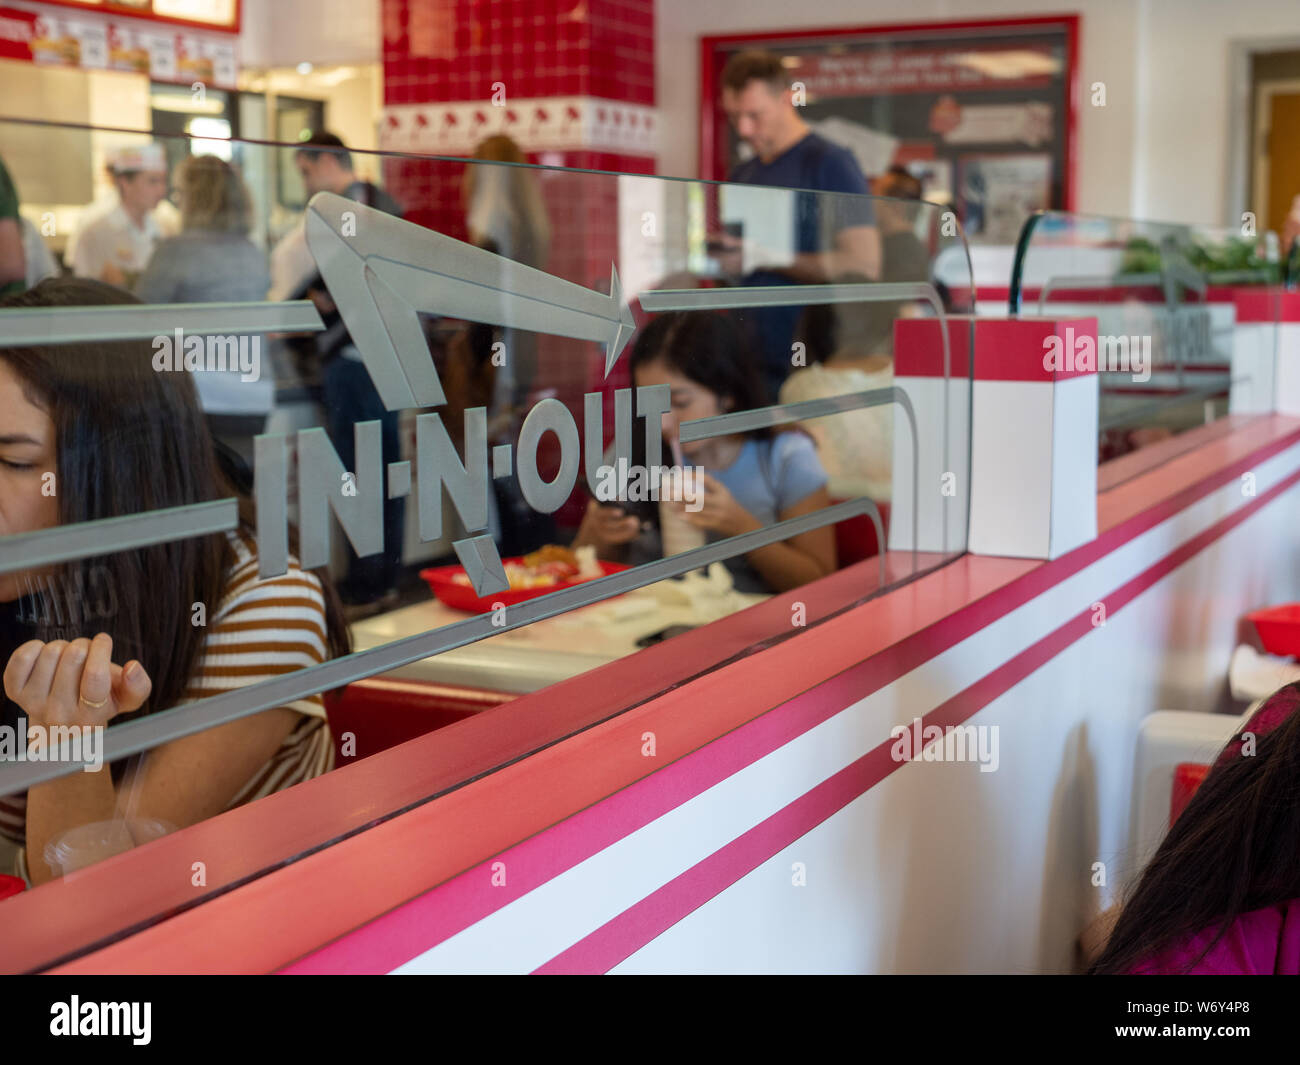 Diners eating at In-N-Out Burger location behind logo on glass divider Stock Photo